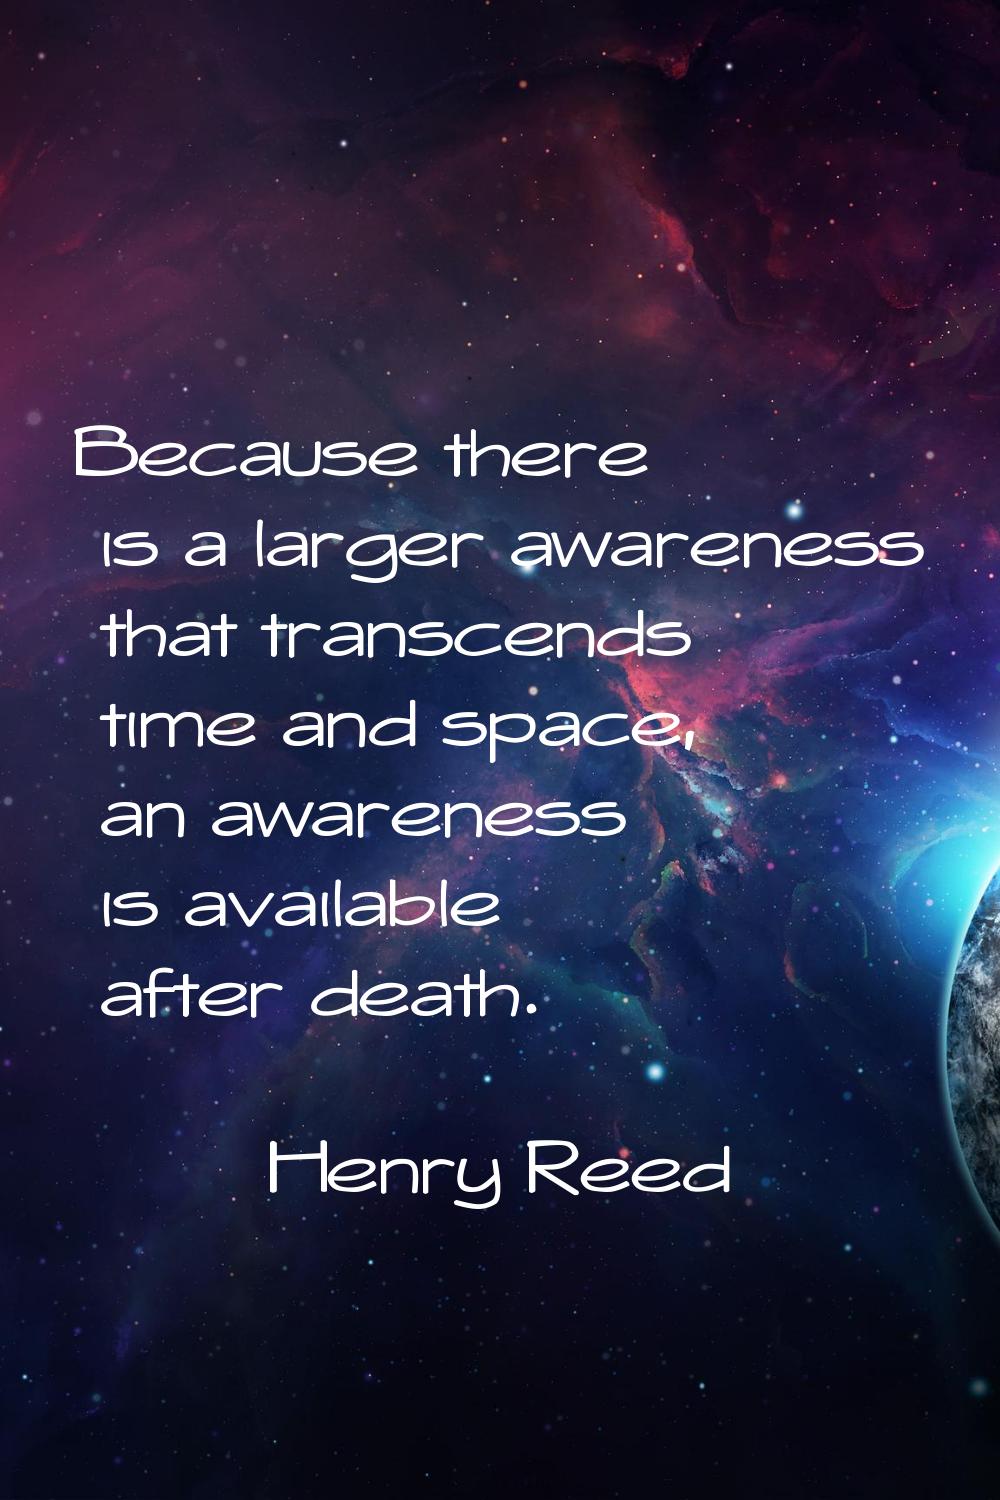 Because there is a larger awareness that transcends time and space, an awareness is available after